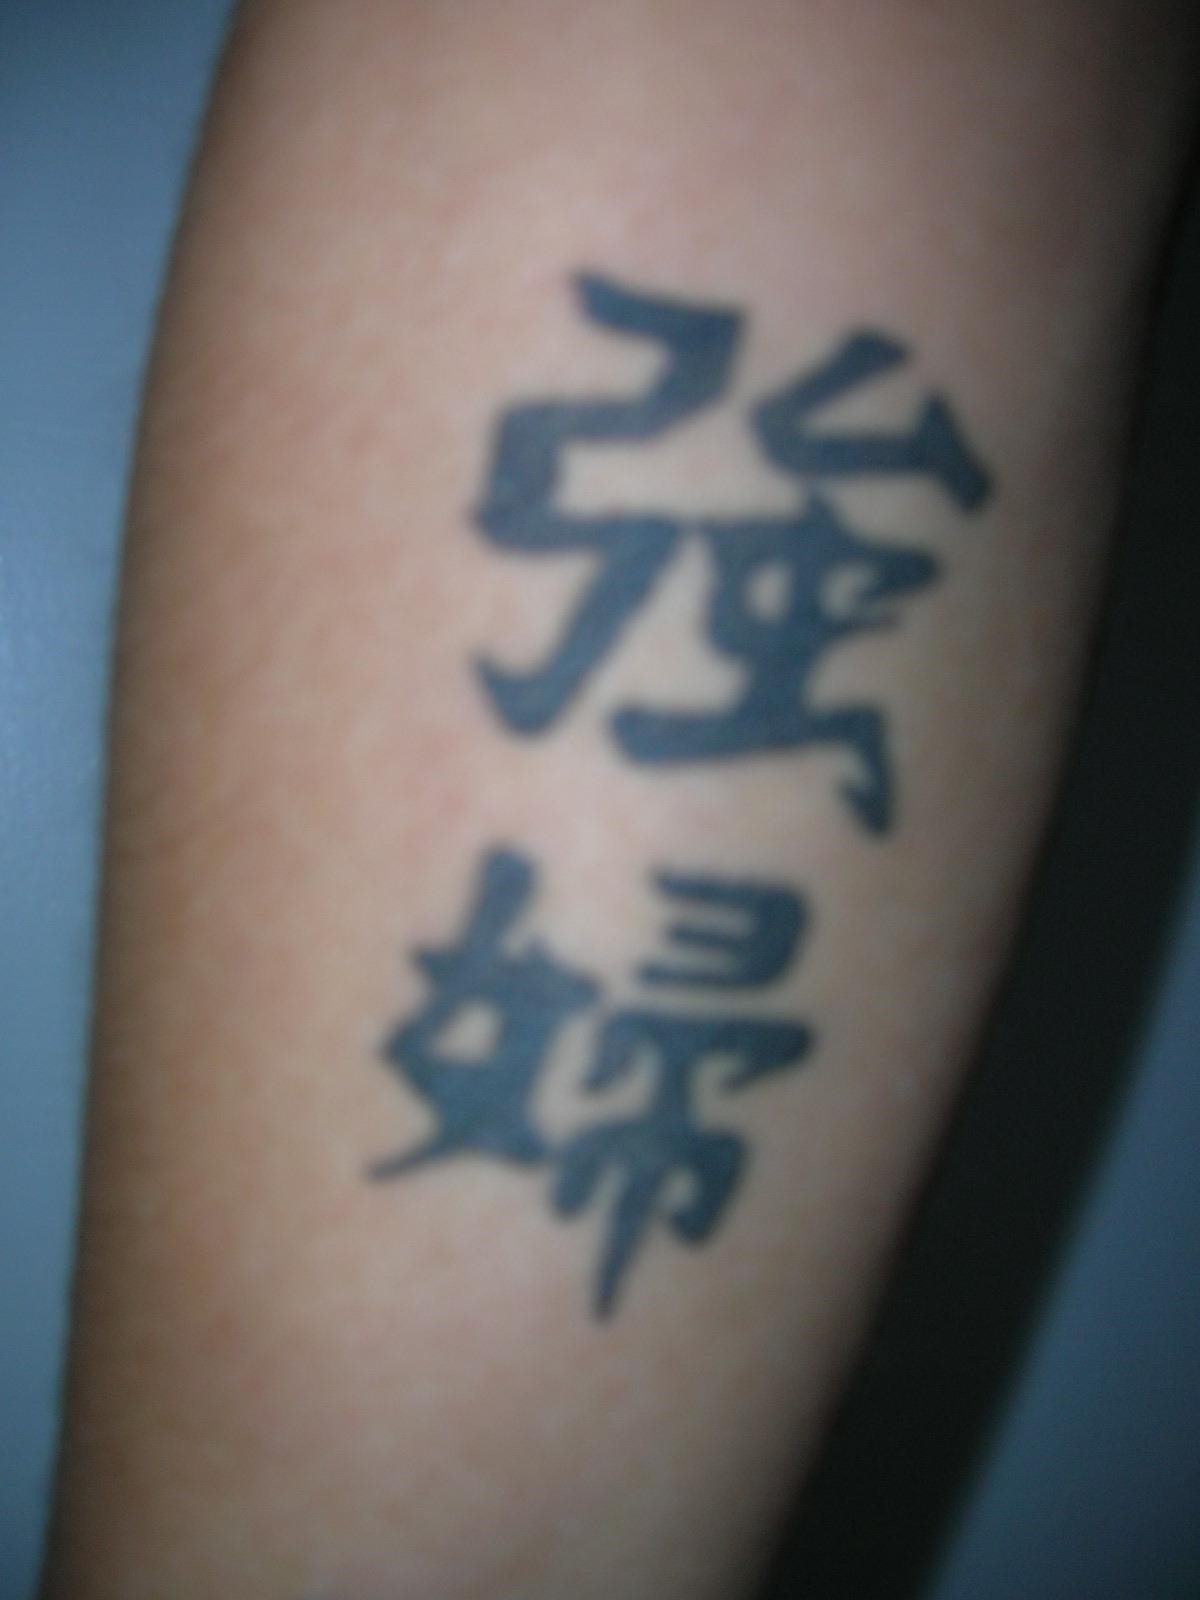 10+ Chinese Tattoo Symbols Ideas That Will Blow Your Mind! - alexie